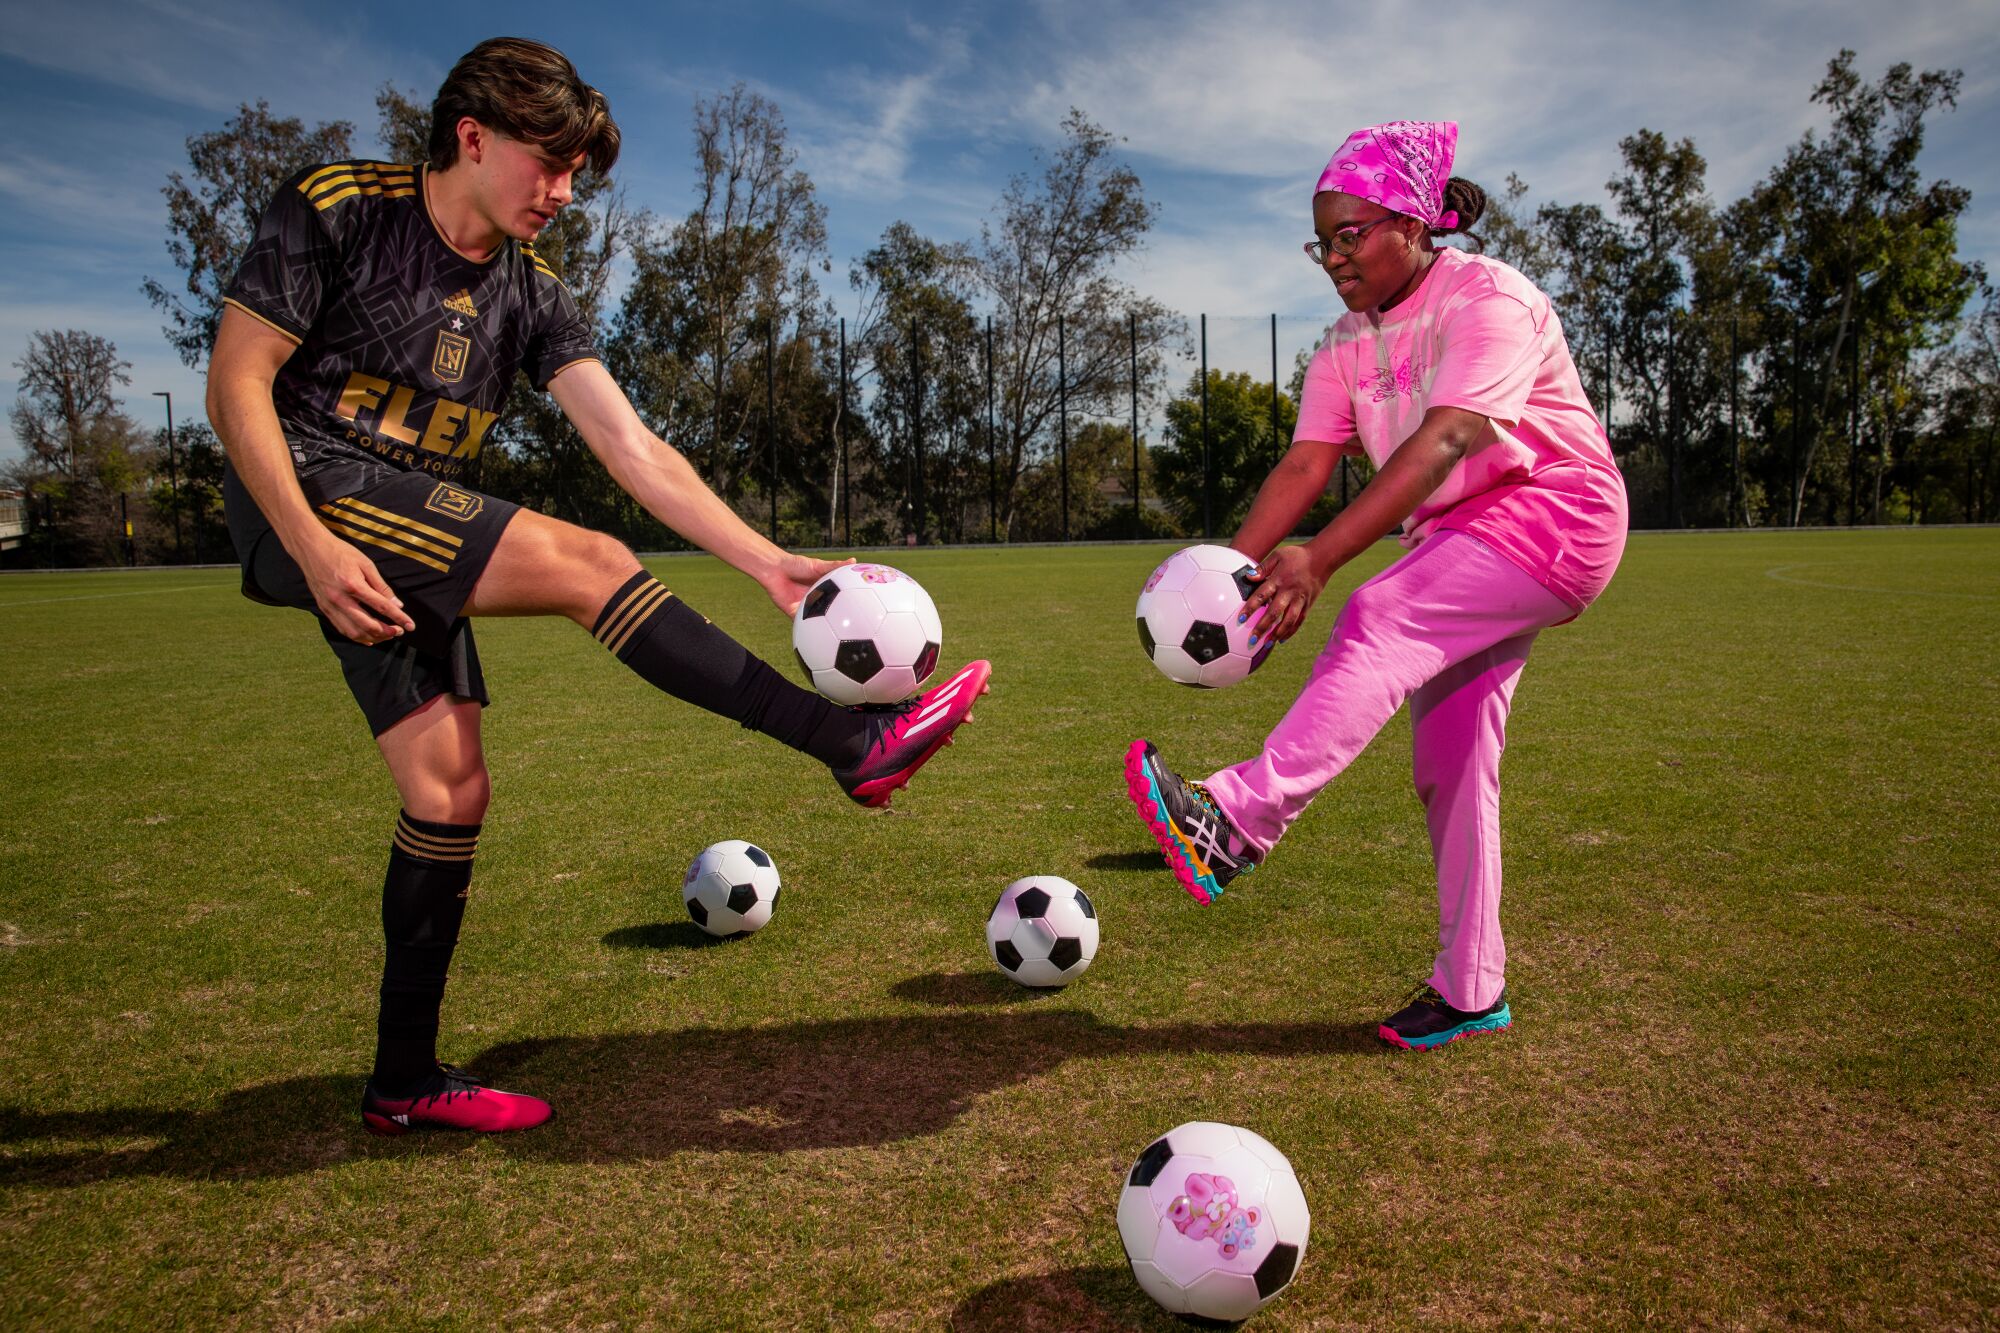 A man in black shorts and a top and a woman in pink hold soccer balls.